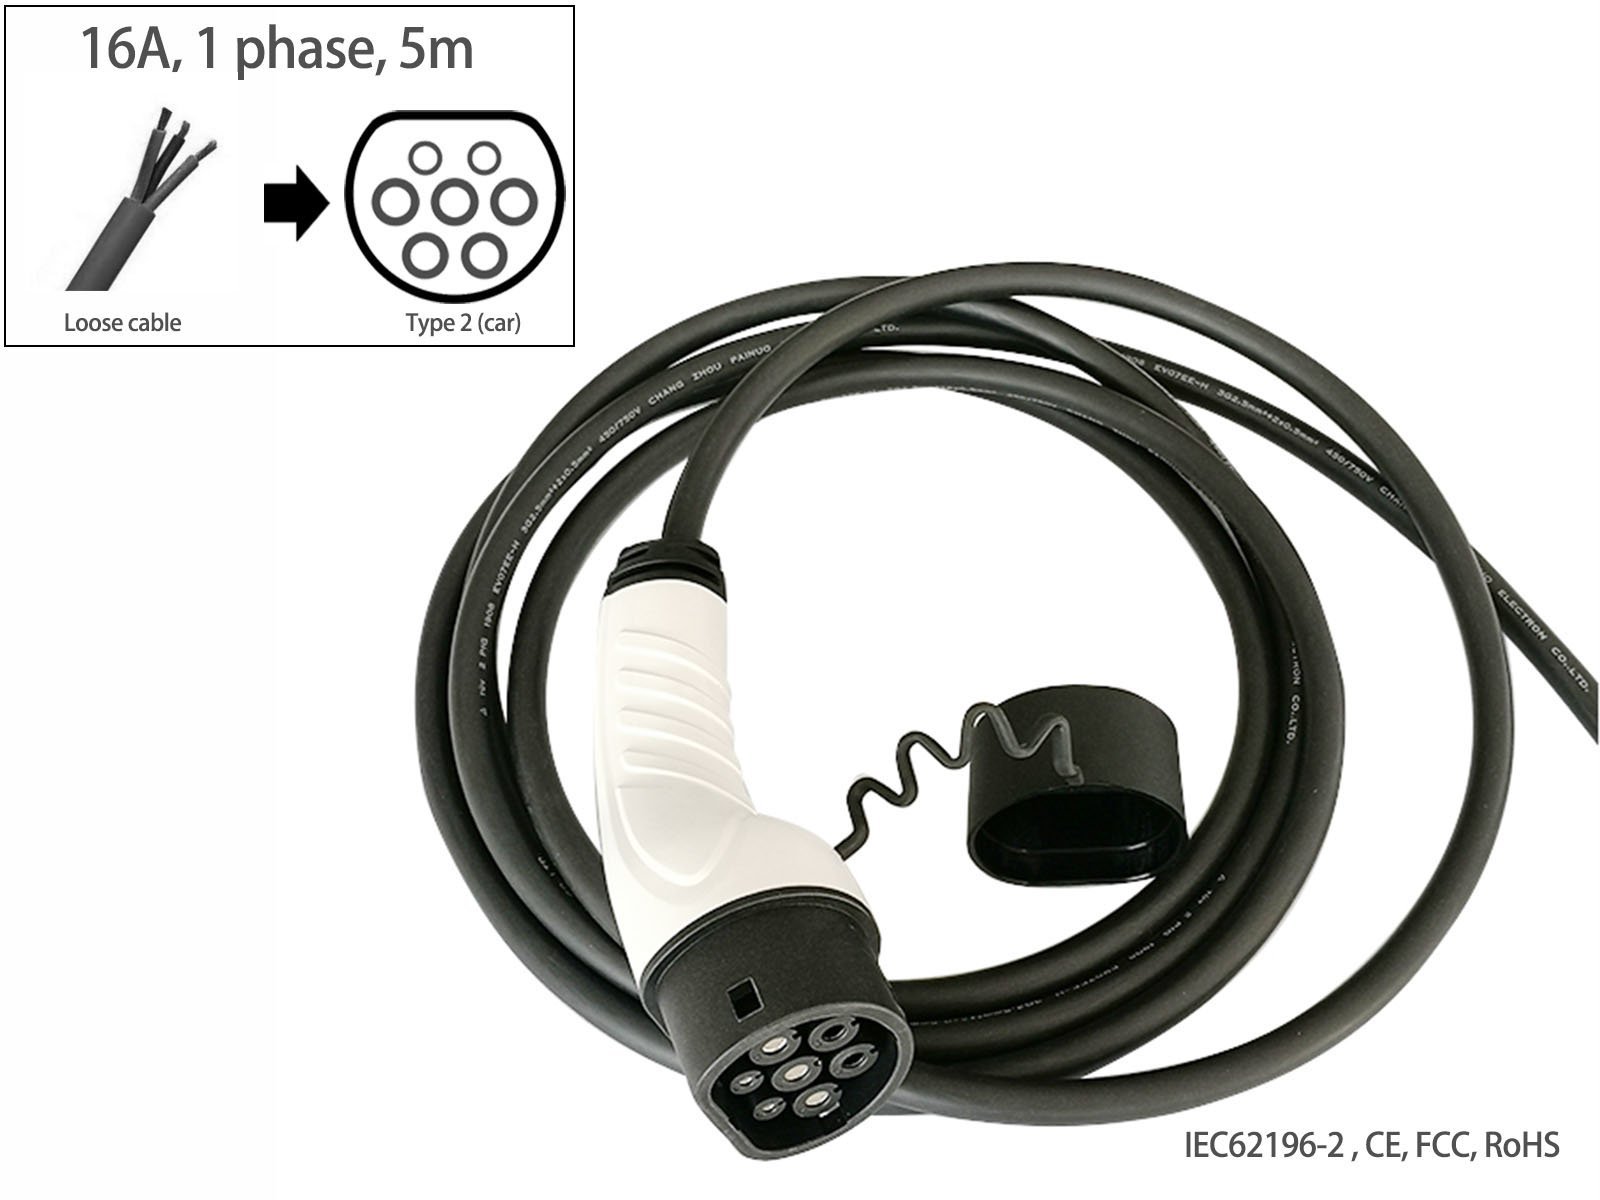 Renault Zoe Charging Cable